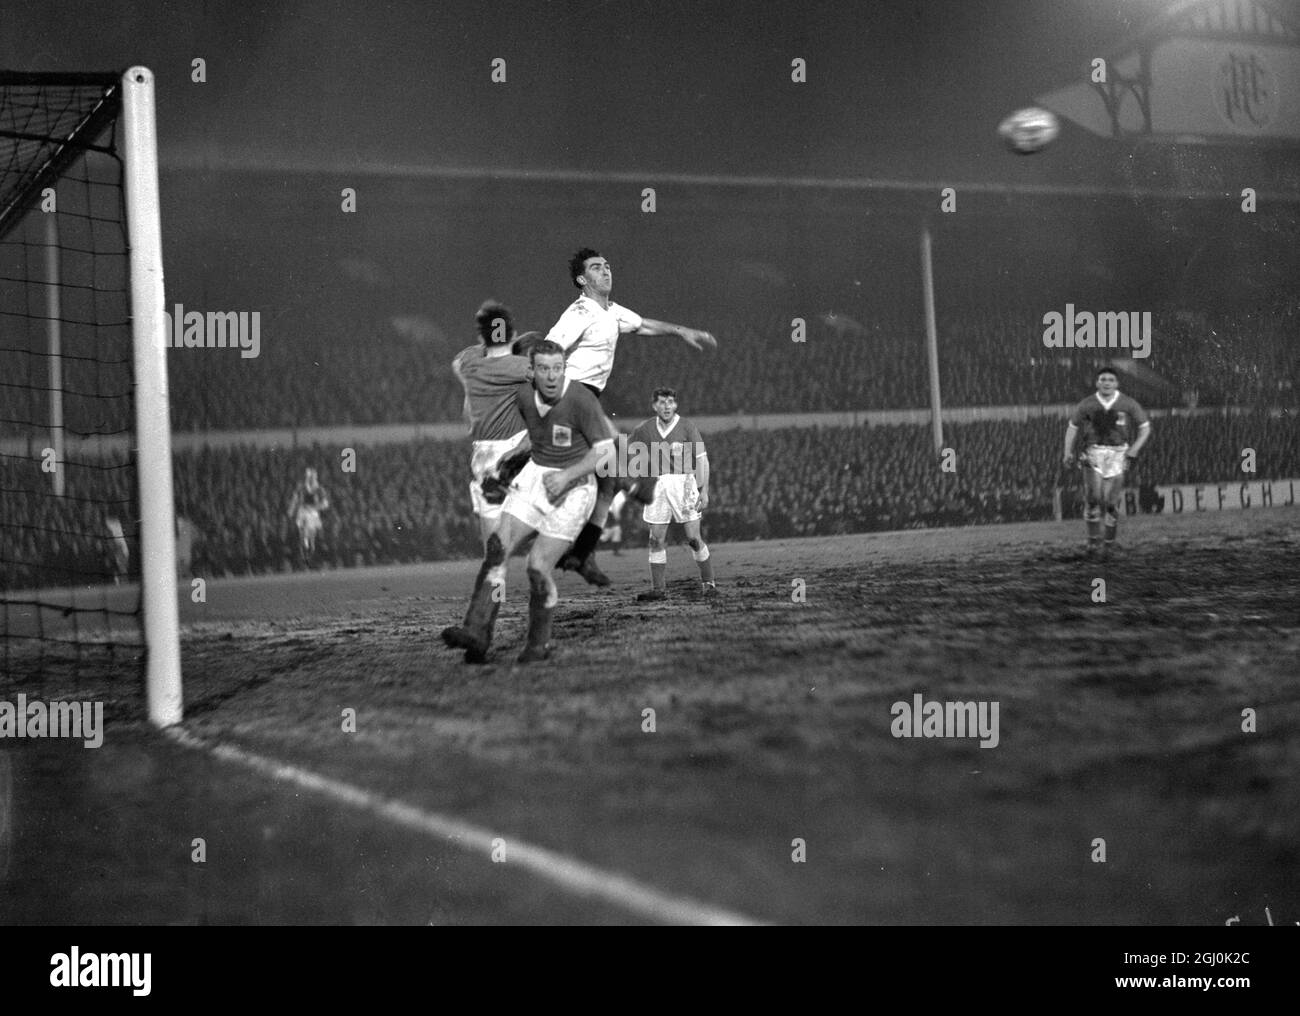 London: In their fourth- round replay of the F.A. Cup played under floodlights tonight, Tottenham Hotspurs beat Crewe Alexandra by thirteen goals to two. Here, Crewe goalkeeper Evans jumps for the ball during a Tottenham attack with Crewe defender Willmott (No.5) and Spurs centre- forward R. Smith (Highest). 3 February 1960 Stock Photo